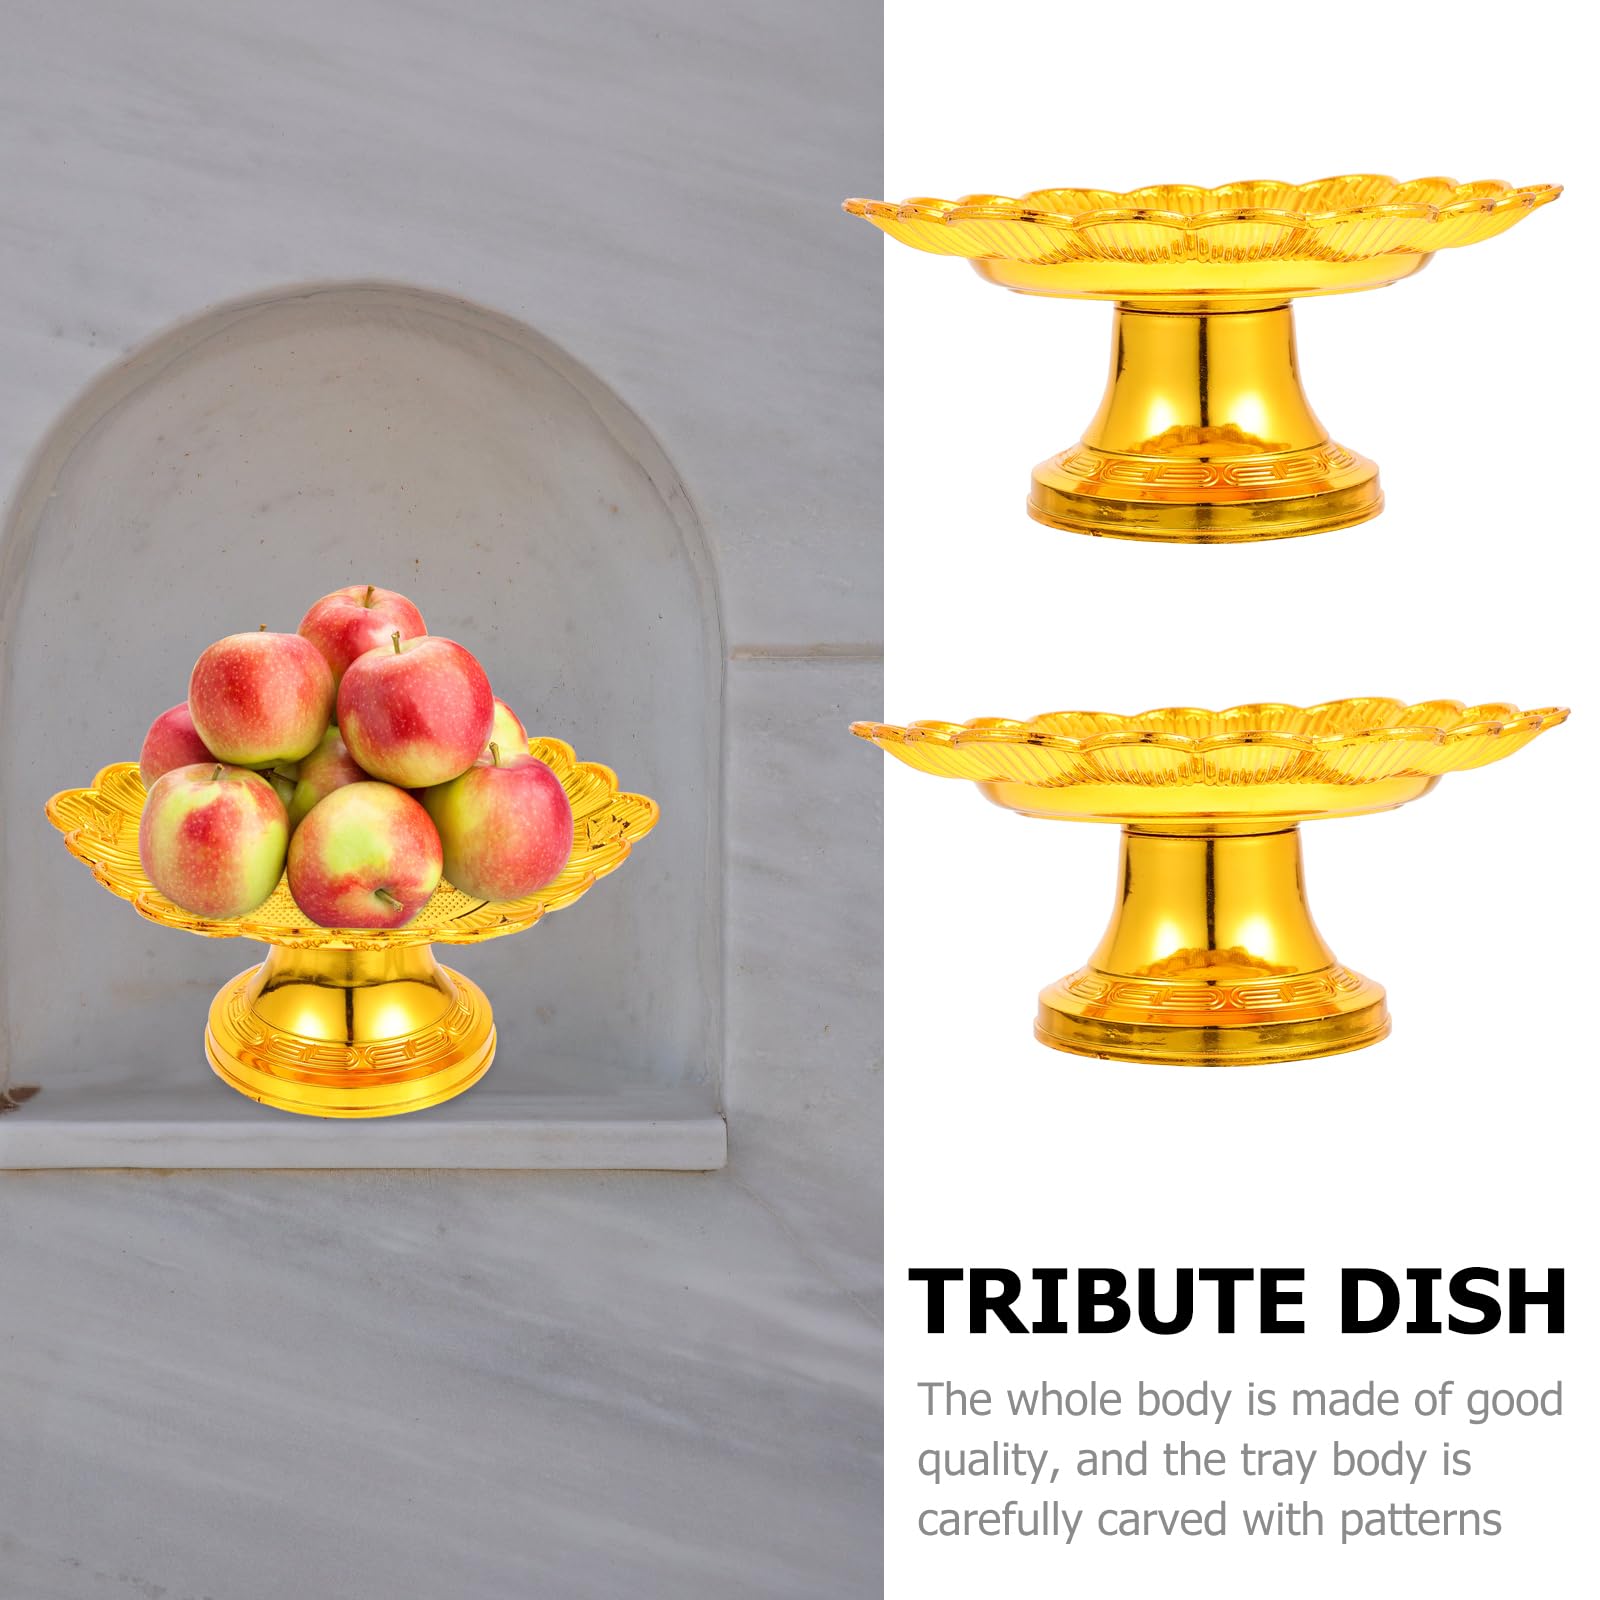 Buddha Altar Fruit Plate：2PCS Offering Plate Tribute Serving Trays - Offering Fruit Desserts and Snacks for Buddha Altar Temple - Gold (8 Inches)